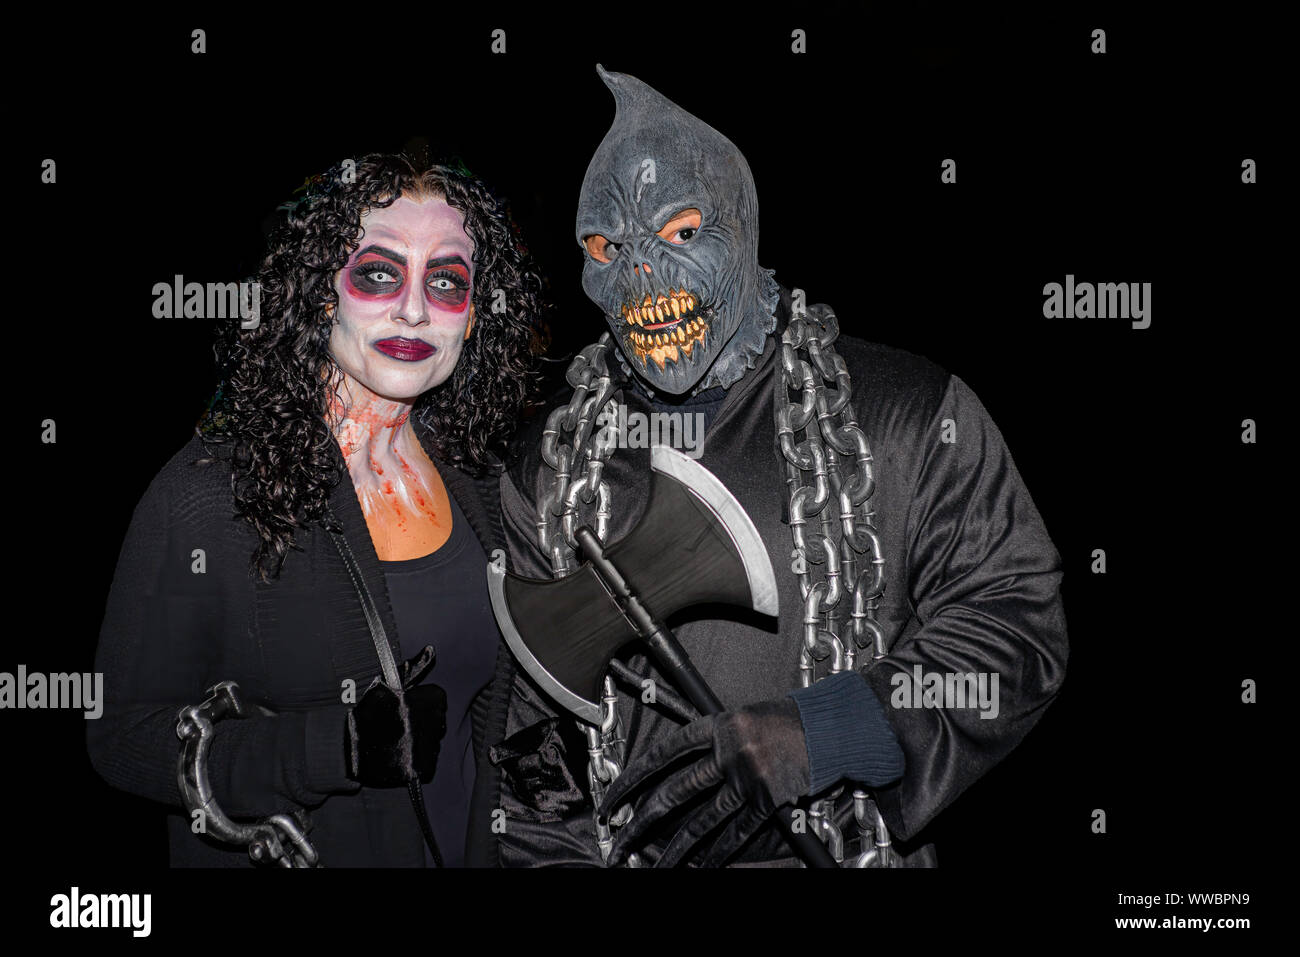 Salem Massachusetts USA 10/31/2015. Man and woman face makeup and mask on a dark halloween night. Editorial use only Stock Photo